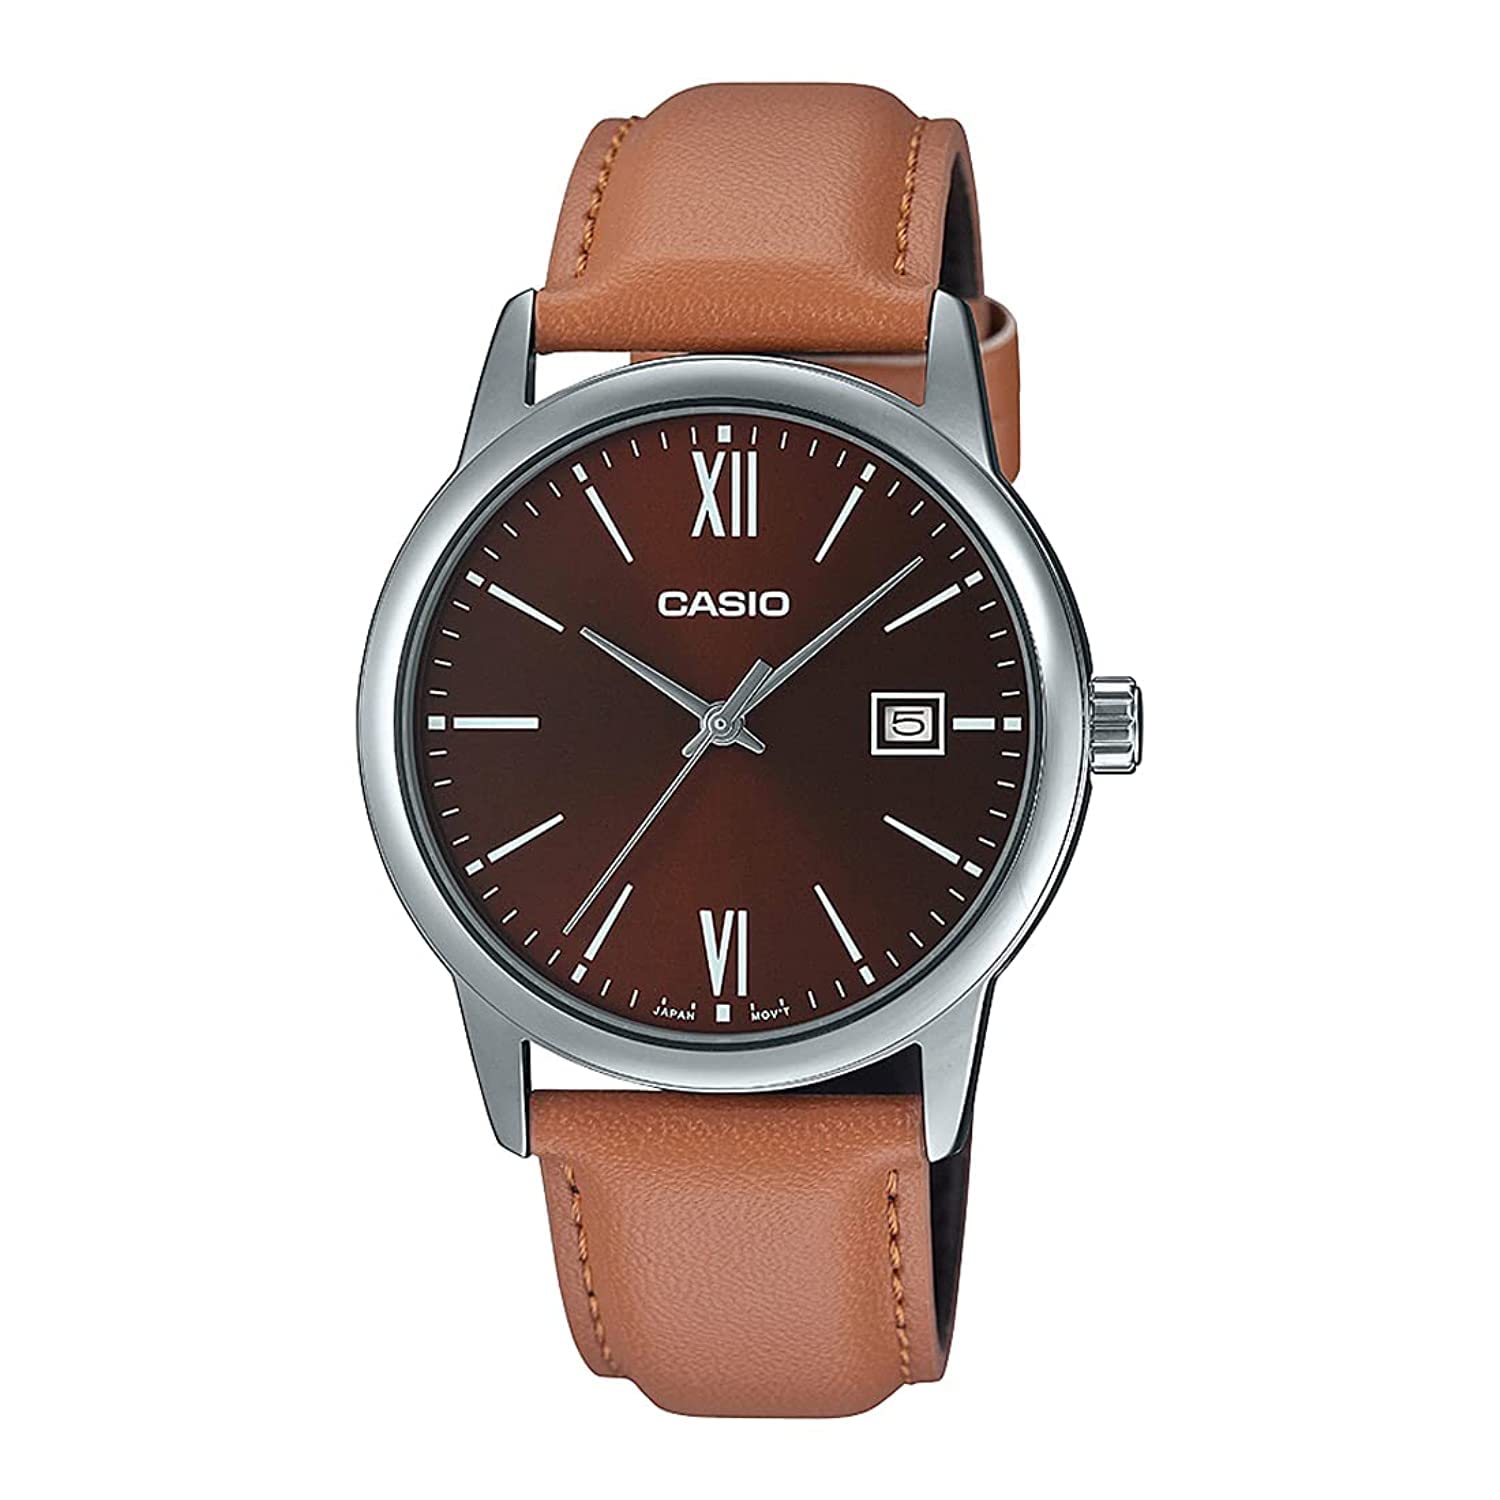 Casio MTP-V002L-5B3 Men's Dress Brown Leather Band Brown Dial Date Watch